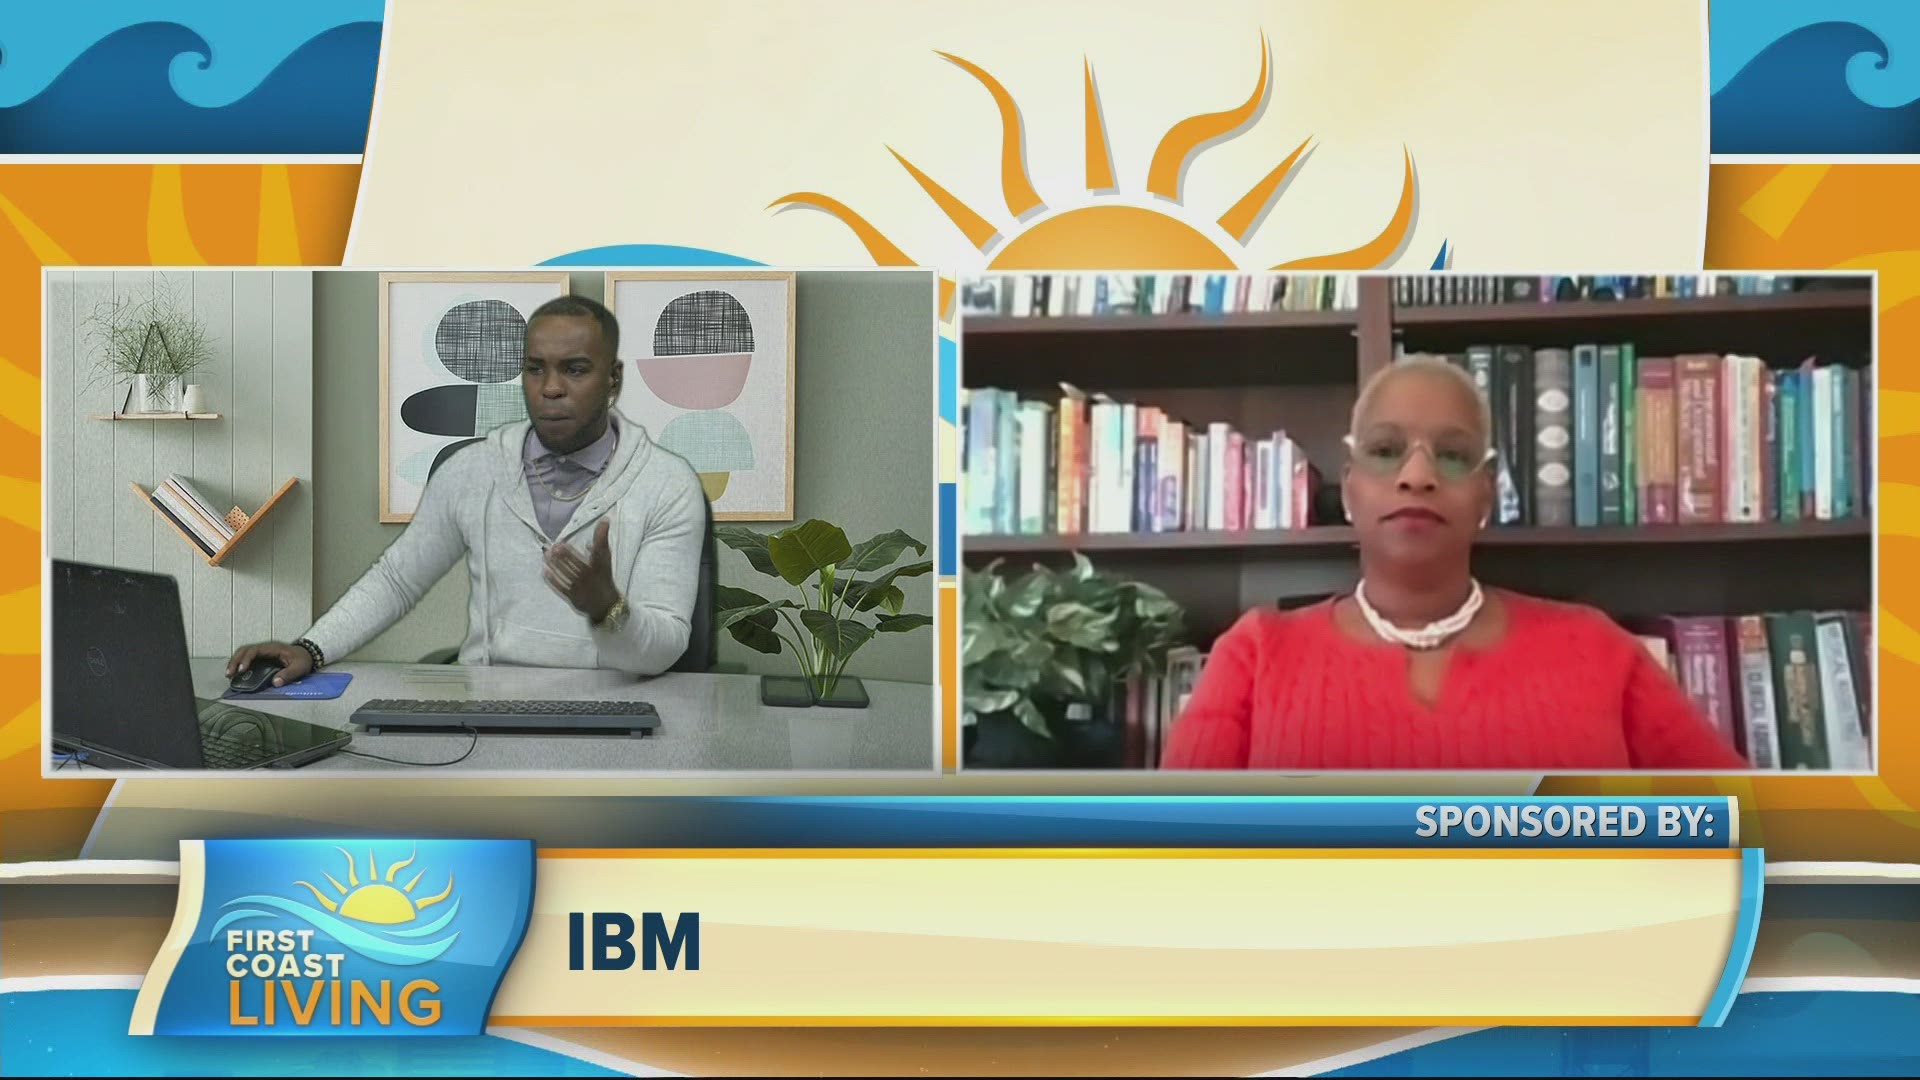 Hear from IBM’s Chief Medical Officer on the importance of wellness for the Black community.